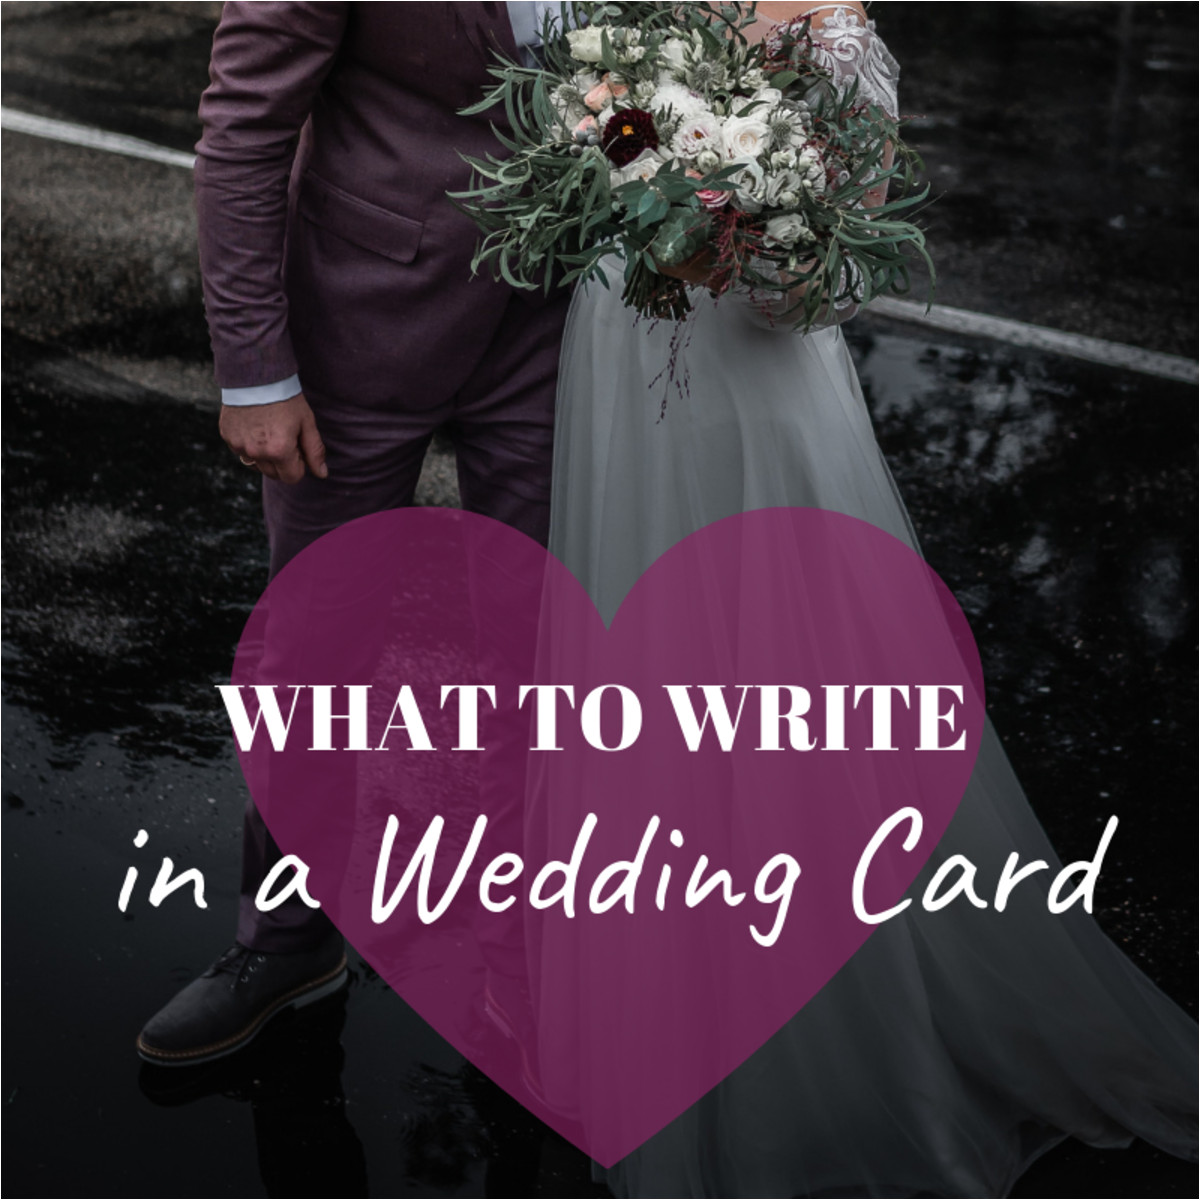 Marriage Quotes to Write In Card Wedding Messages and Quotes to Write In A Card